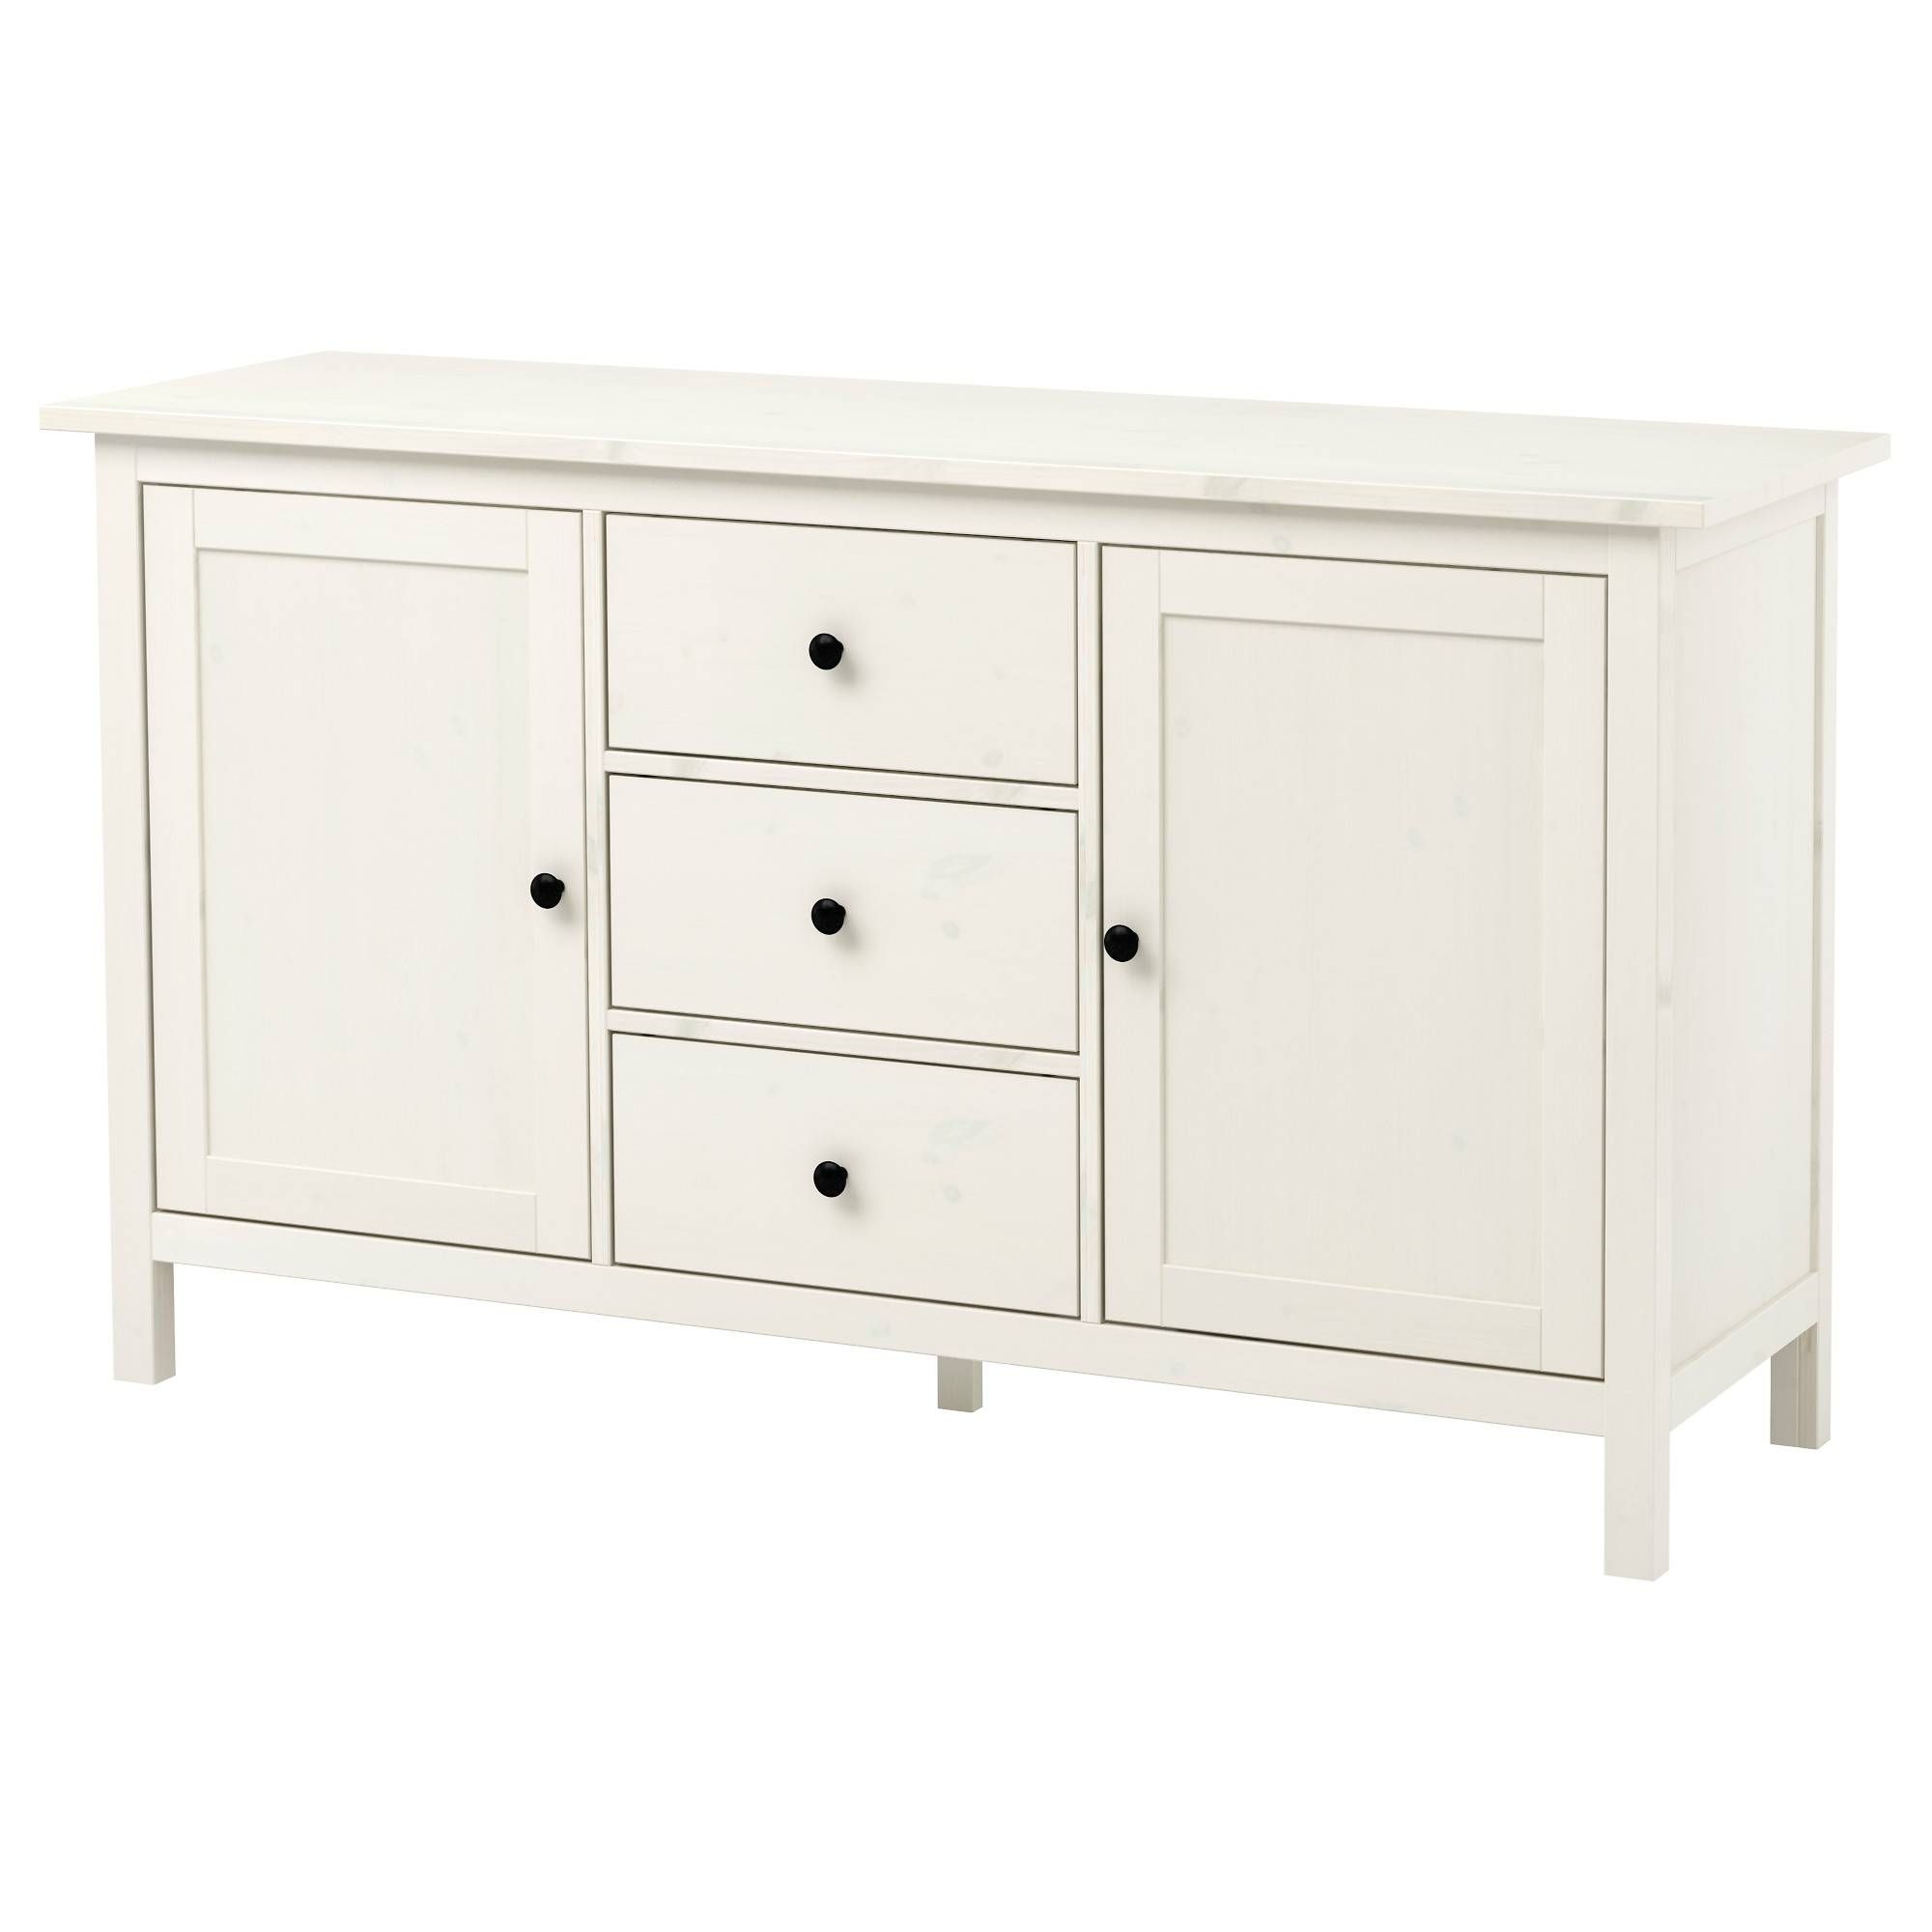 Hemnes Sideboard – White Stain – Ikea Throughout Latest Sideboard Cabinets (View 15 of 15)